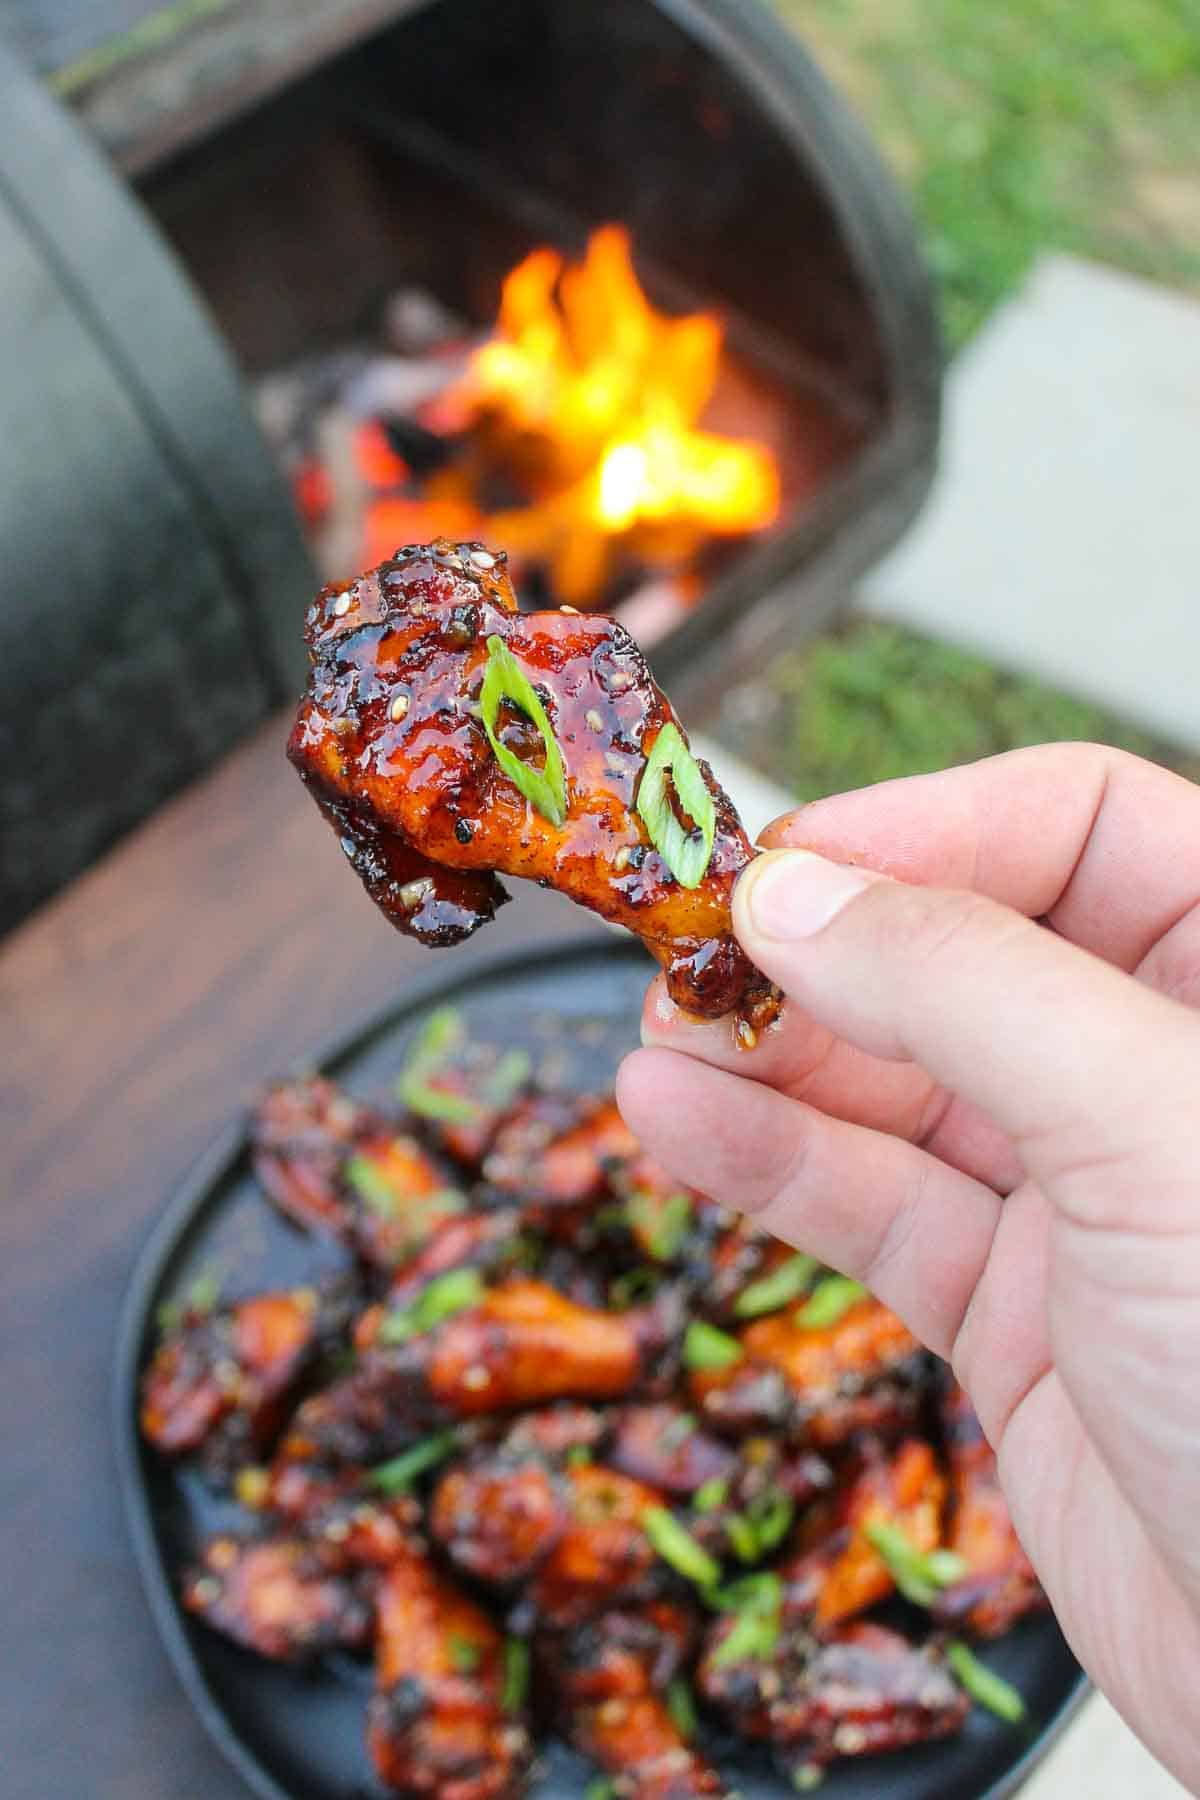 Holding a single hot honey garlic wing up to the camera.